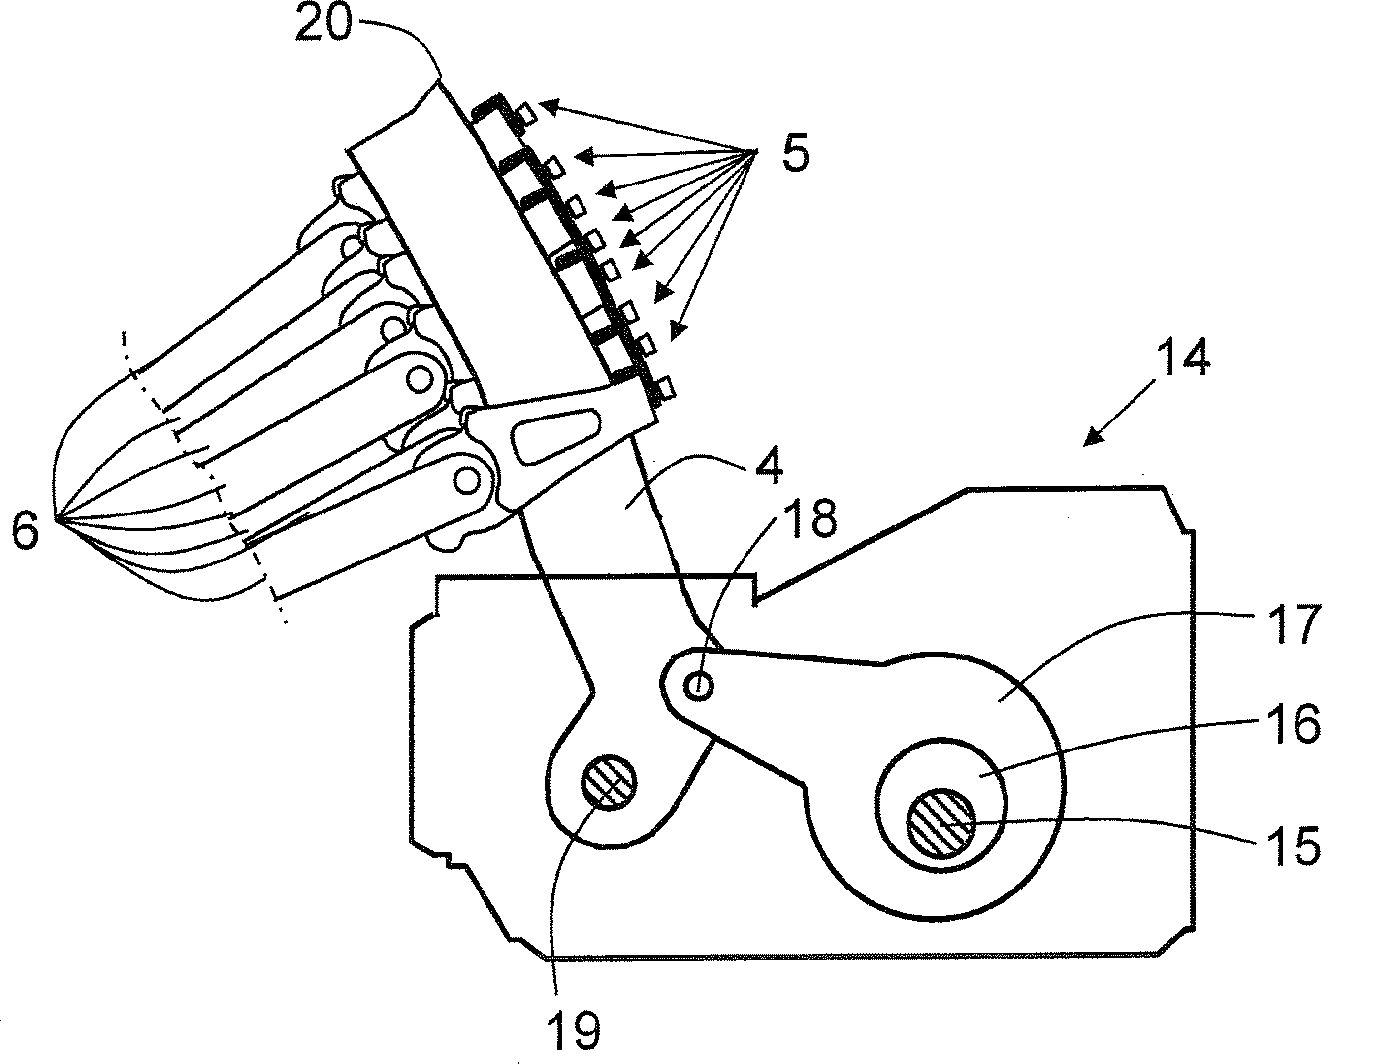 Shed-forming device for a weaving machine